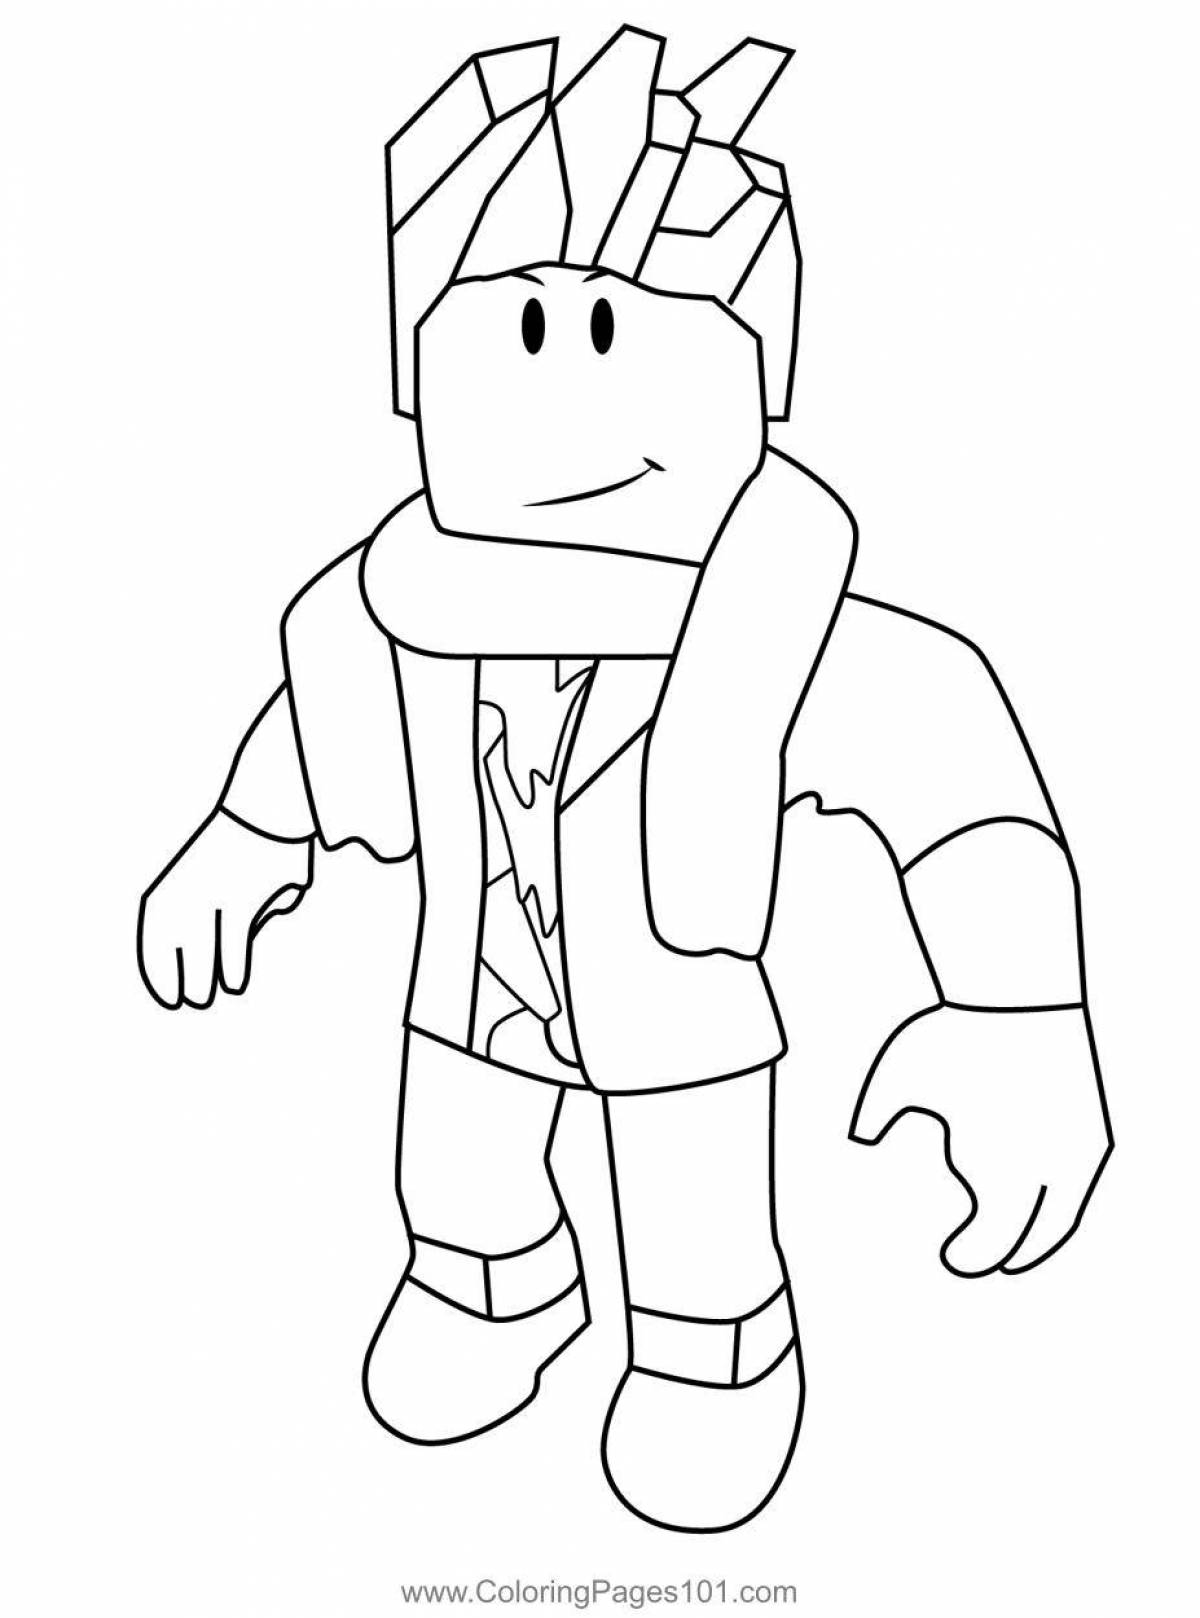 Colorful roblox monsters coloring page